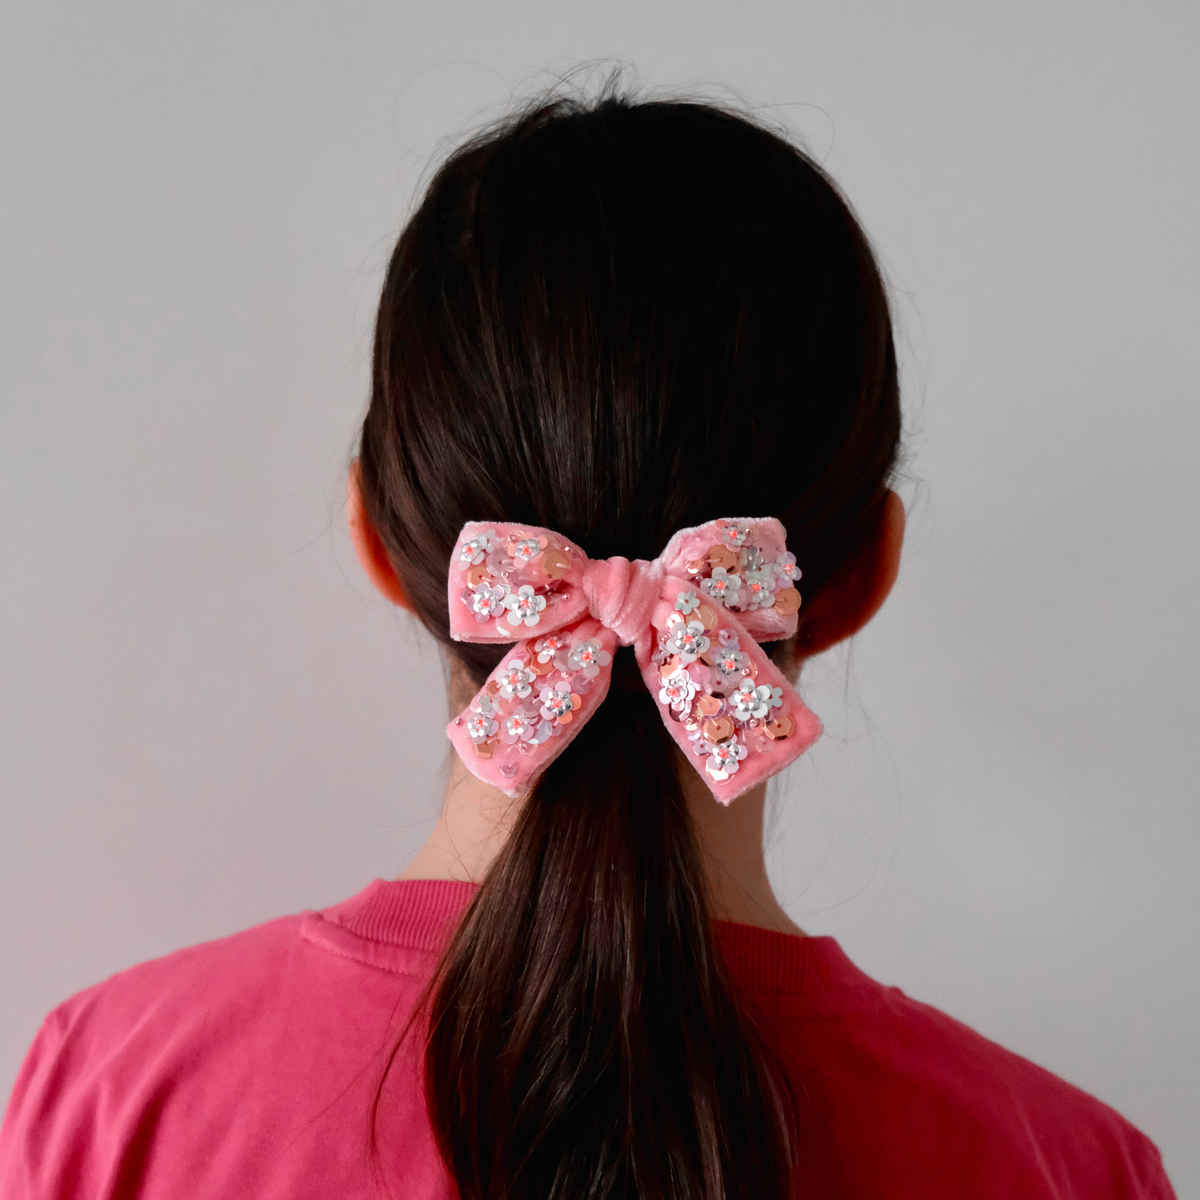 School girl with baby pink velvet hair bow embellished with sequins.